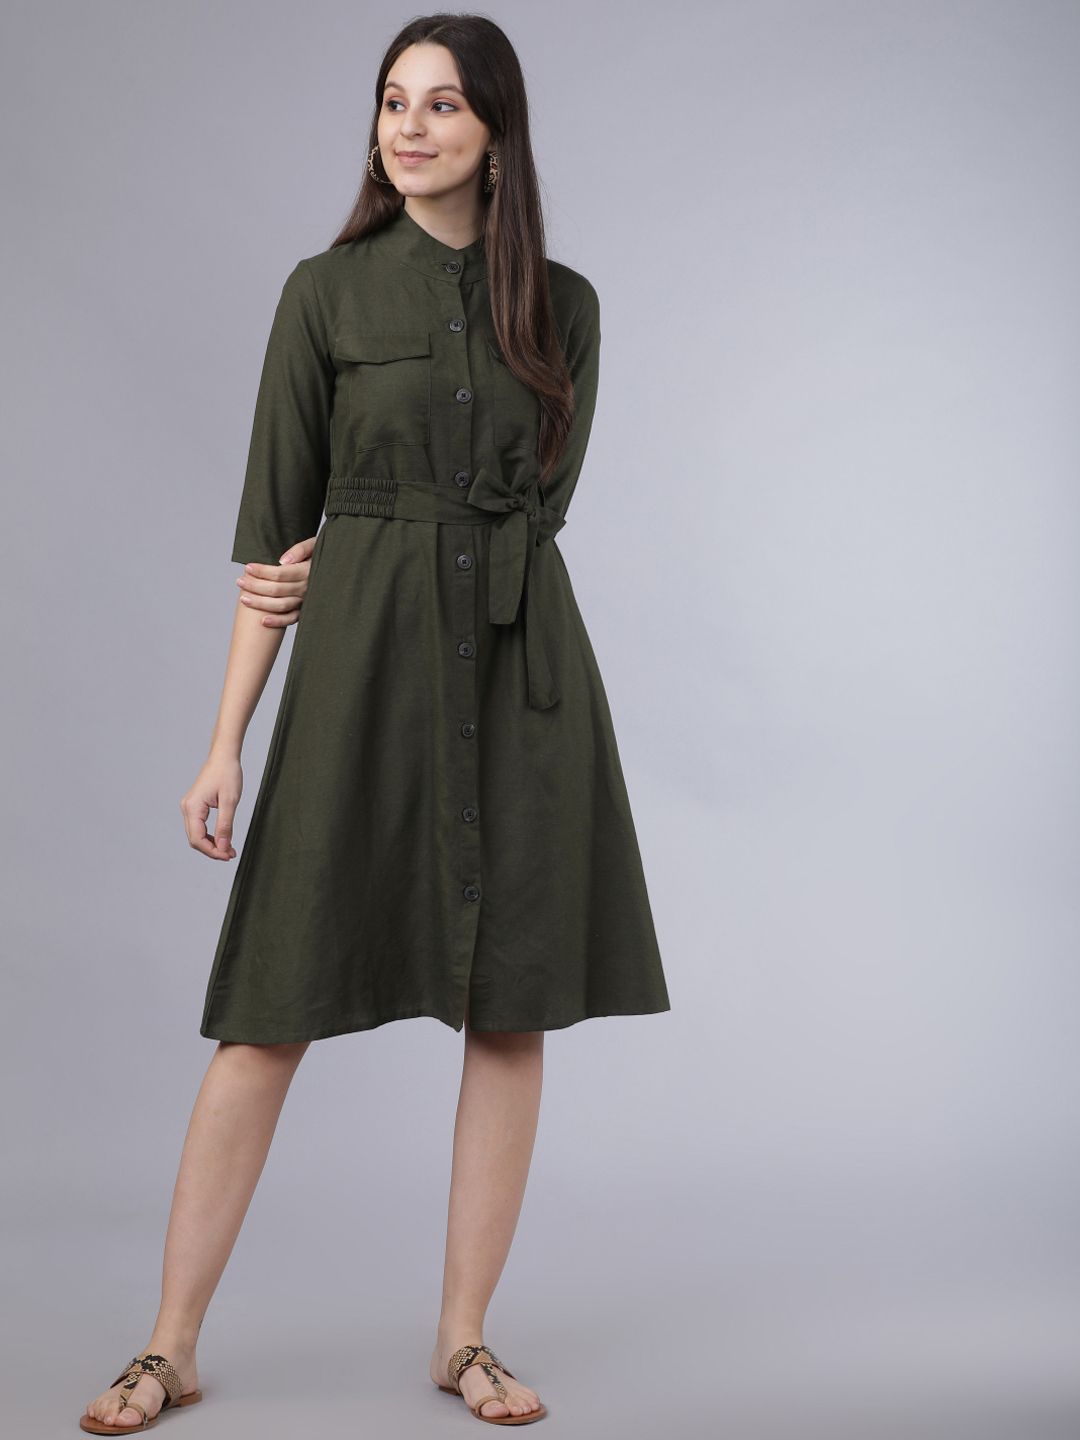 Tokyo Talkies Women Olive Green Solid A-Line Dress Price in India